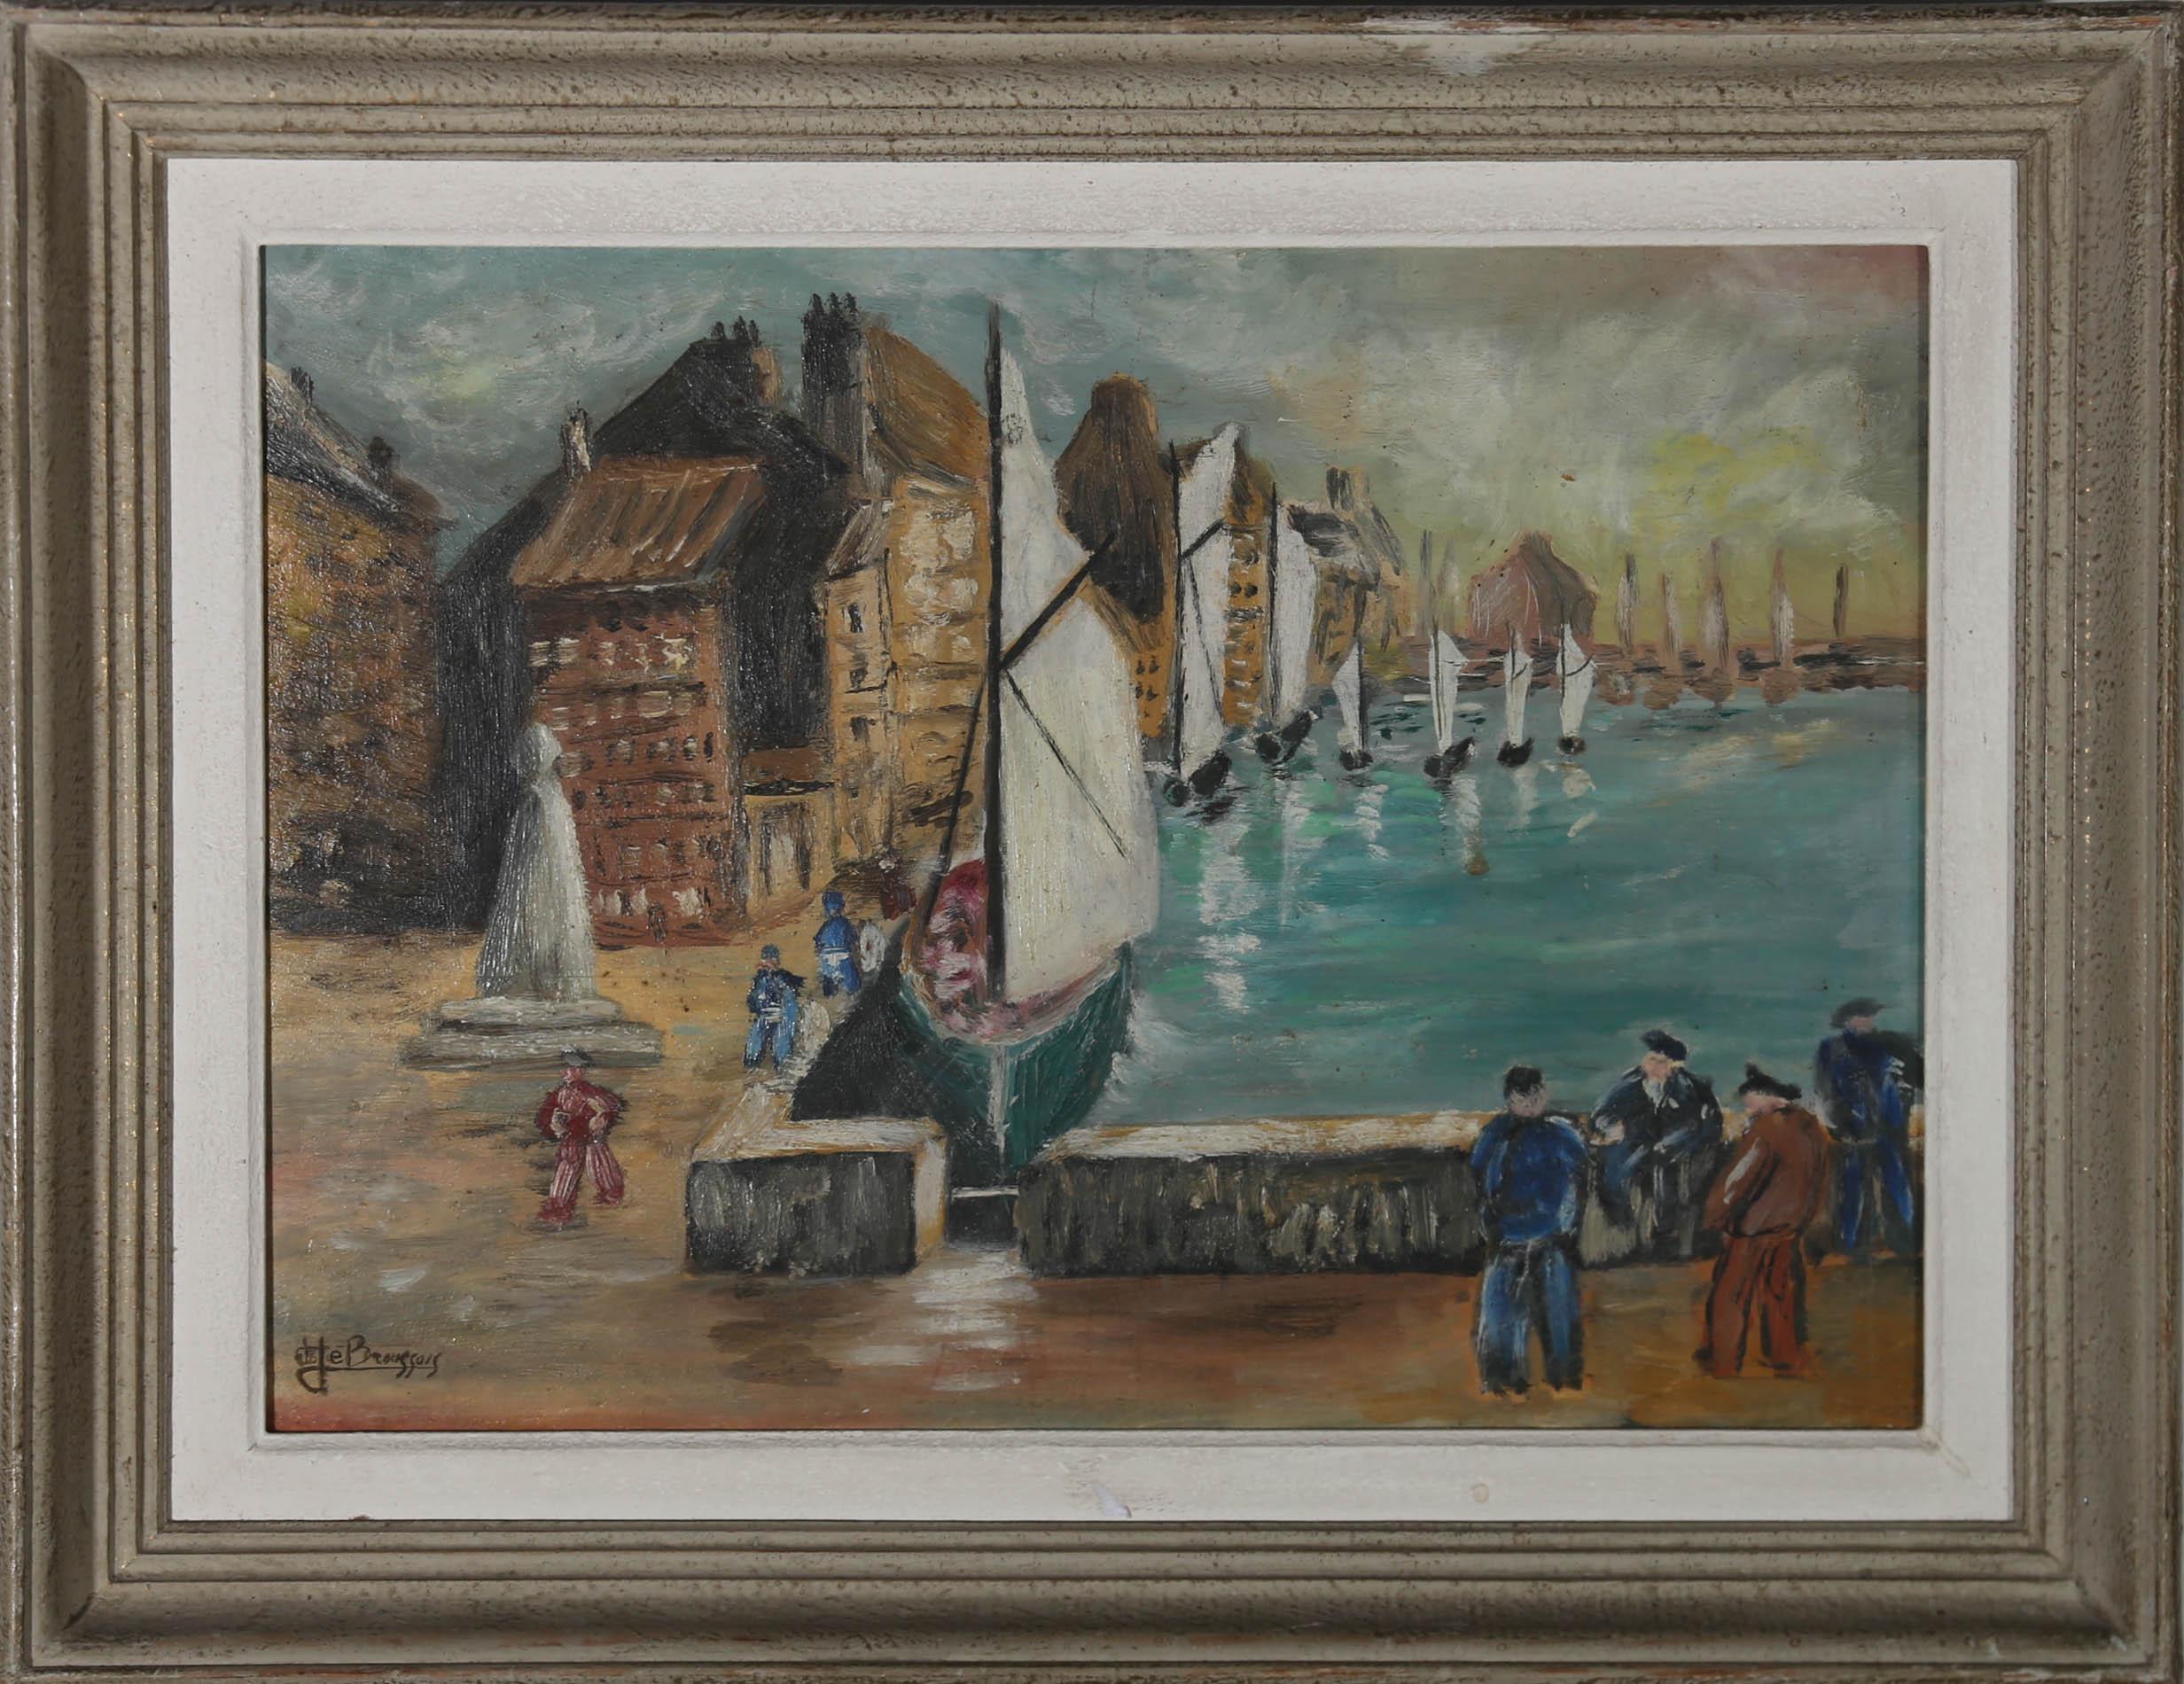 A delightful scene depicting sailboats making their way into a harbour at a French portside town. Painted in an impressionist style using gestural brushwork to capture the scene. Signed with a monogram and illegible full signature to the lower left.